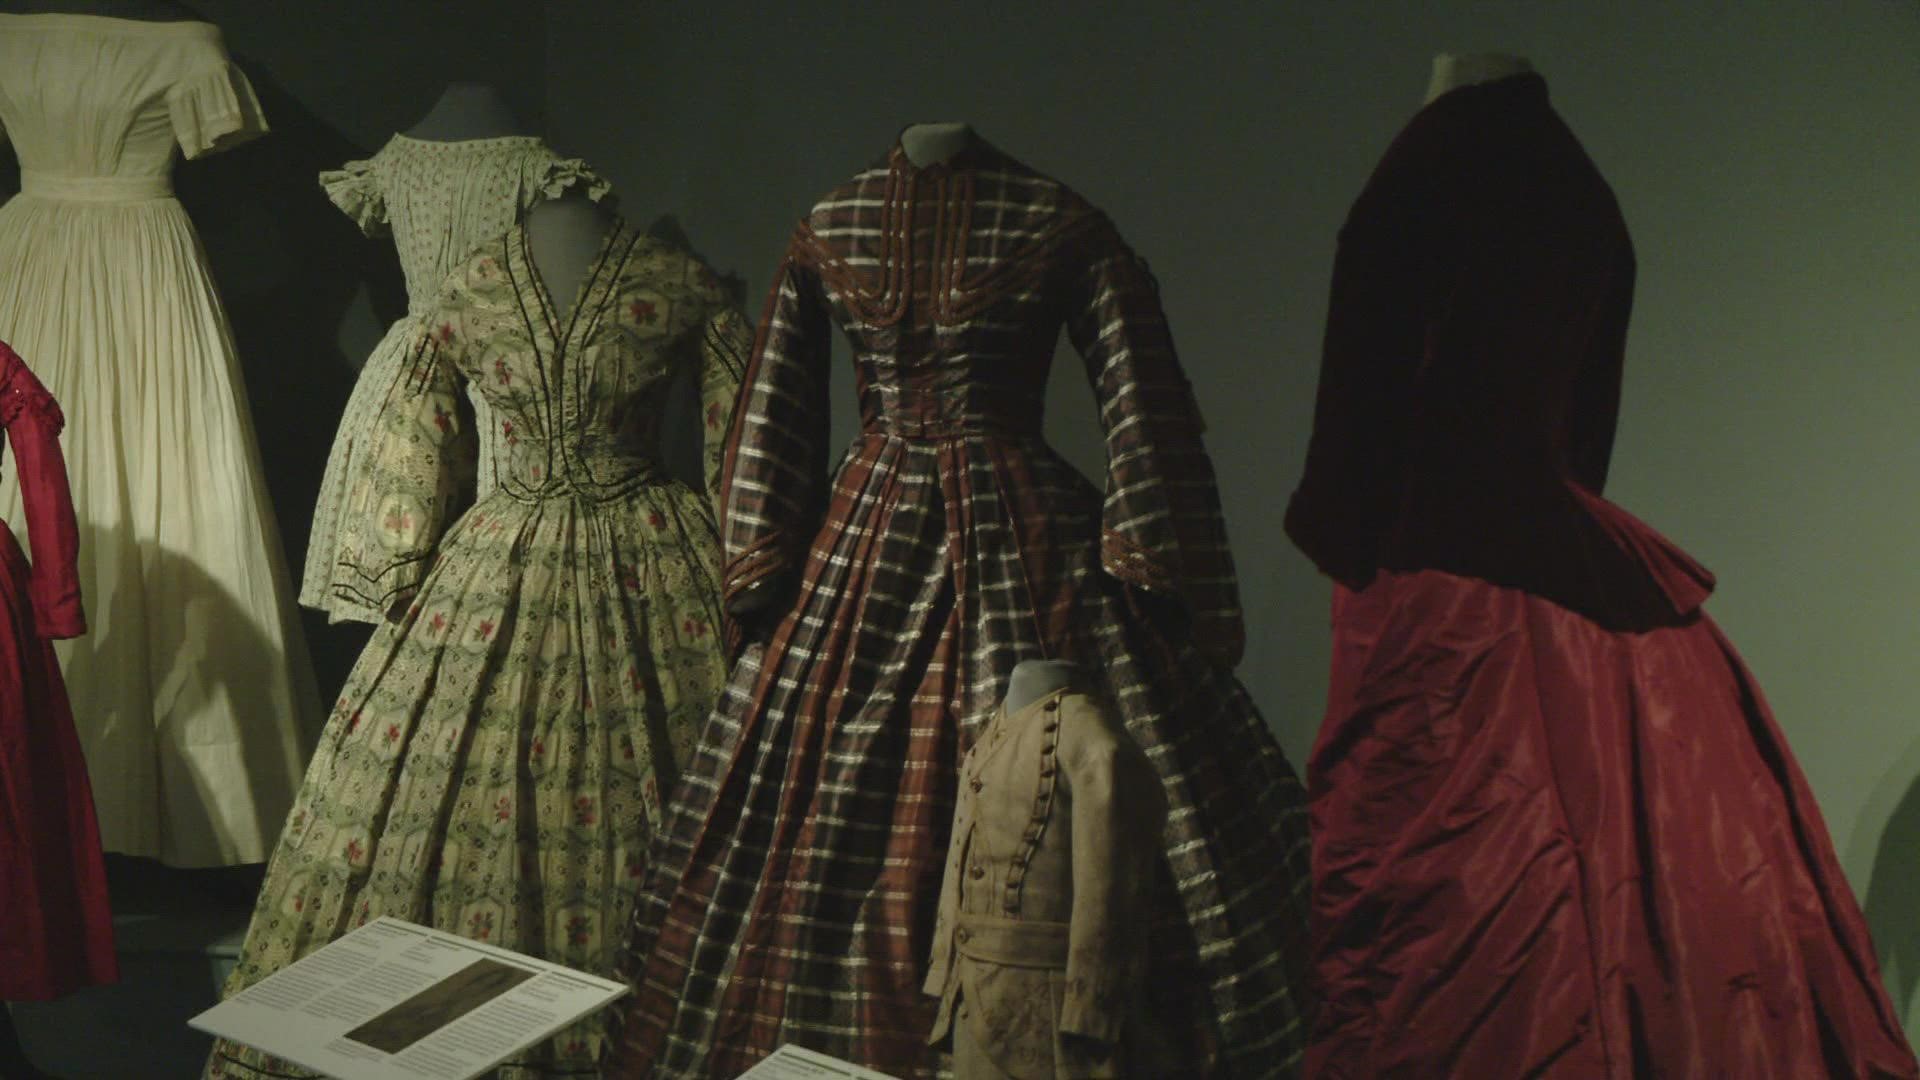 As part of its 200-year anniversary celebration, the Maine Historical Society’s Northern Threads exhibit features fashion from Maine during the late 19th century.